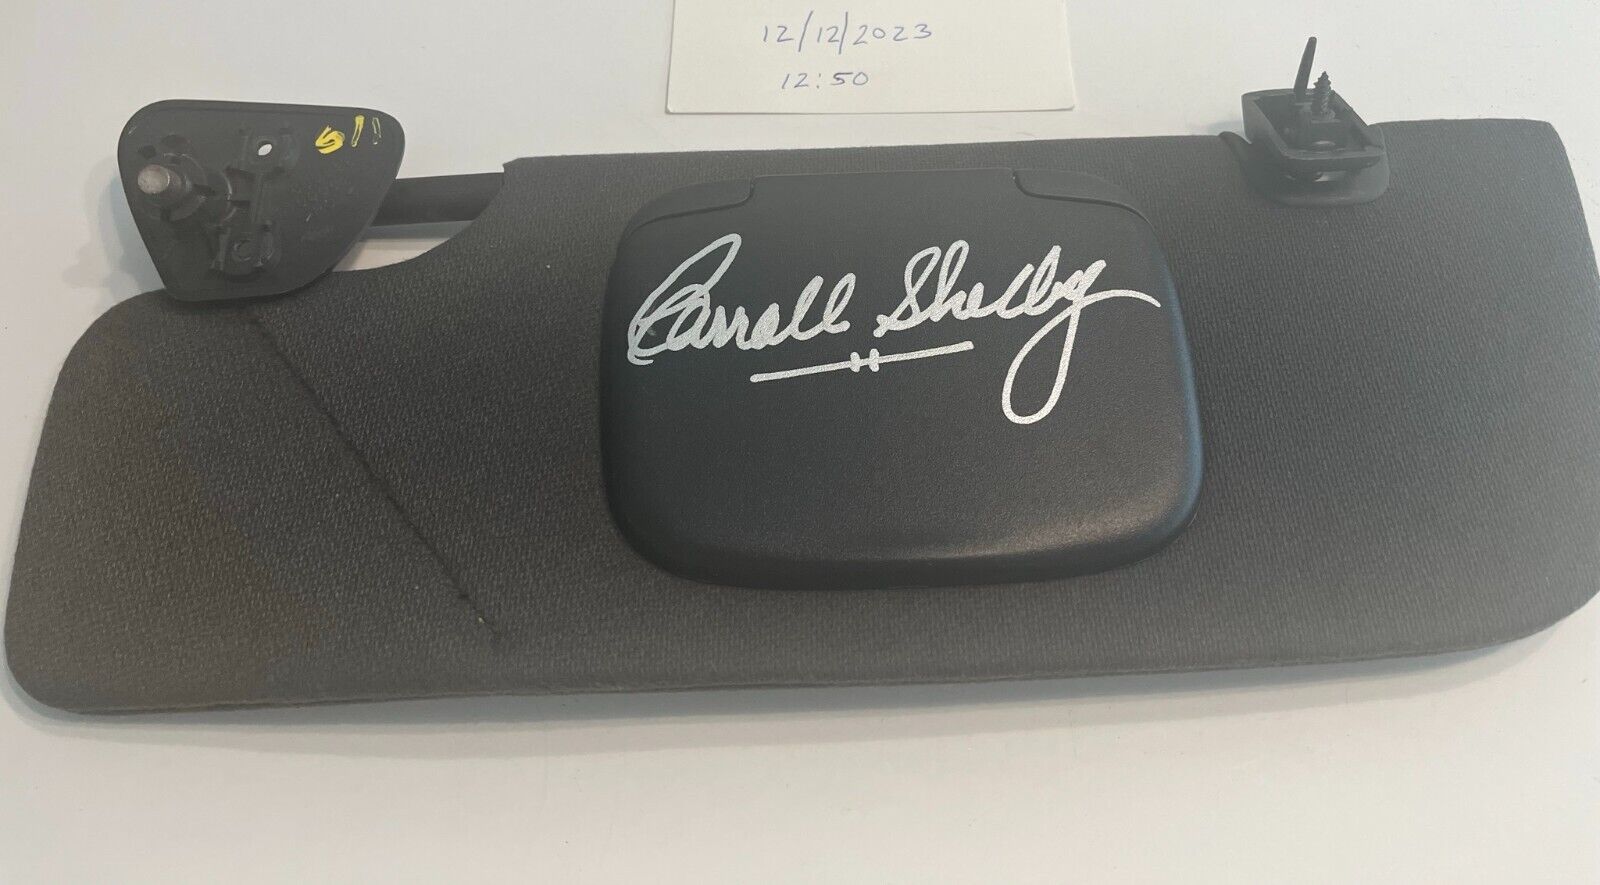 05-09 Ford Mustang ( Authentic Carroll Shelby Signed) 2007 GT500 Visor